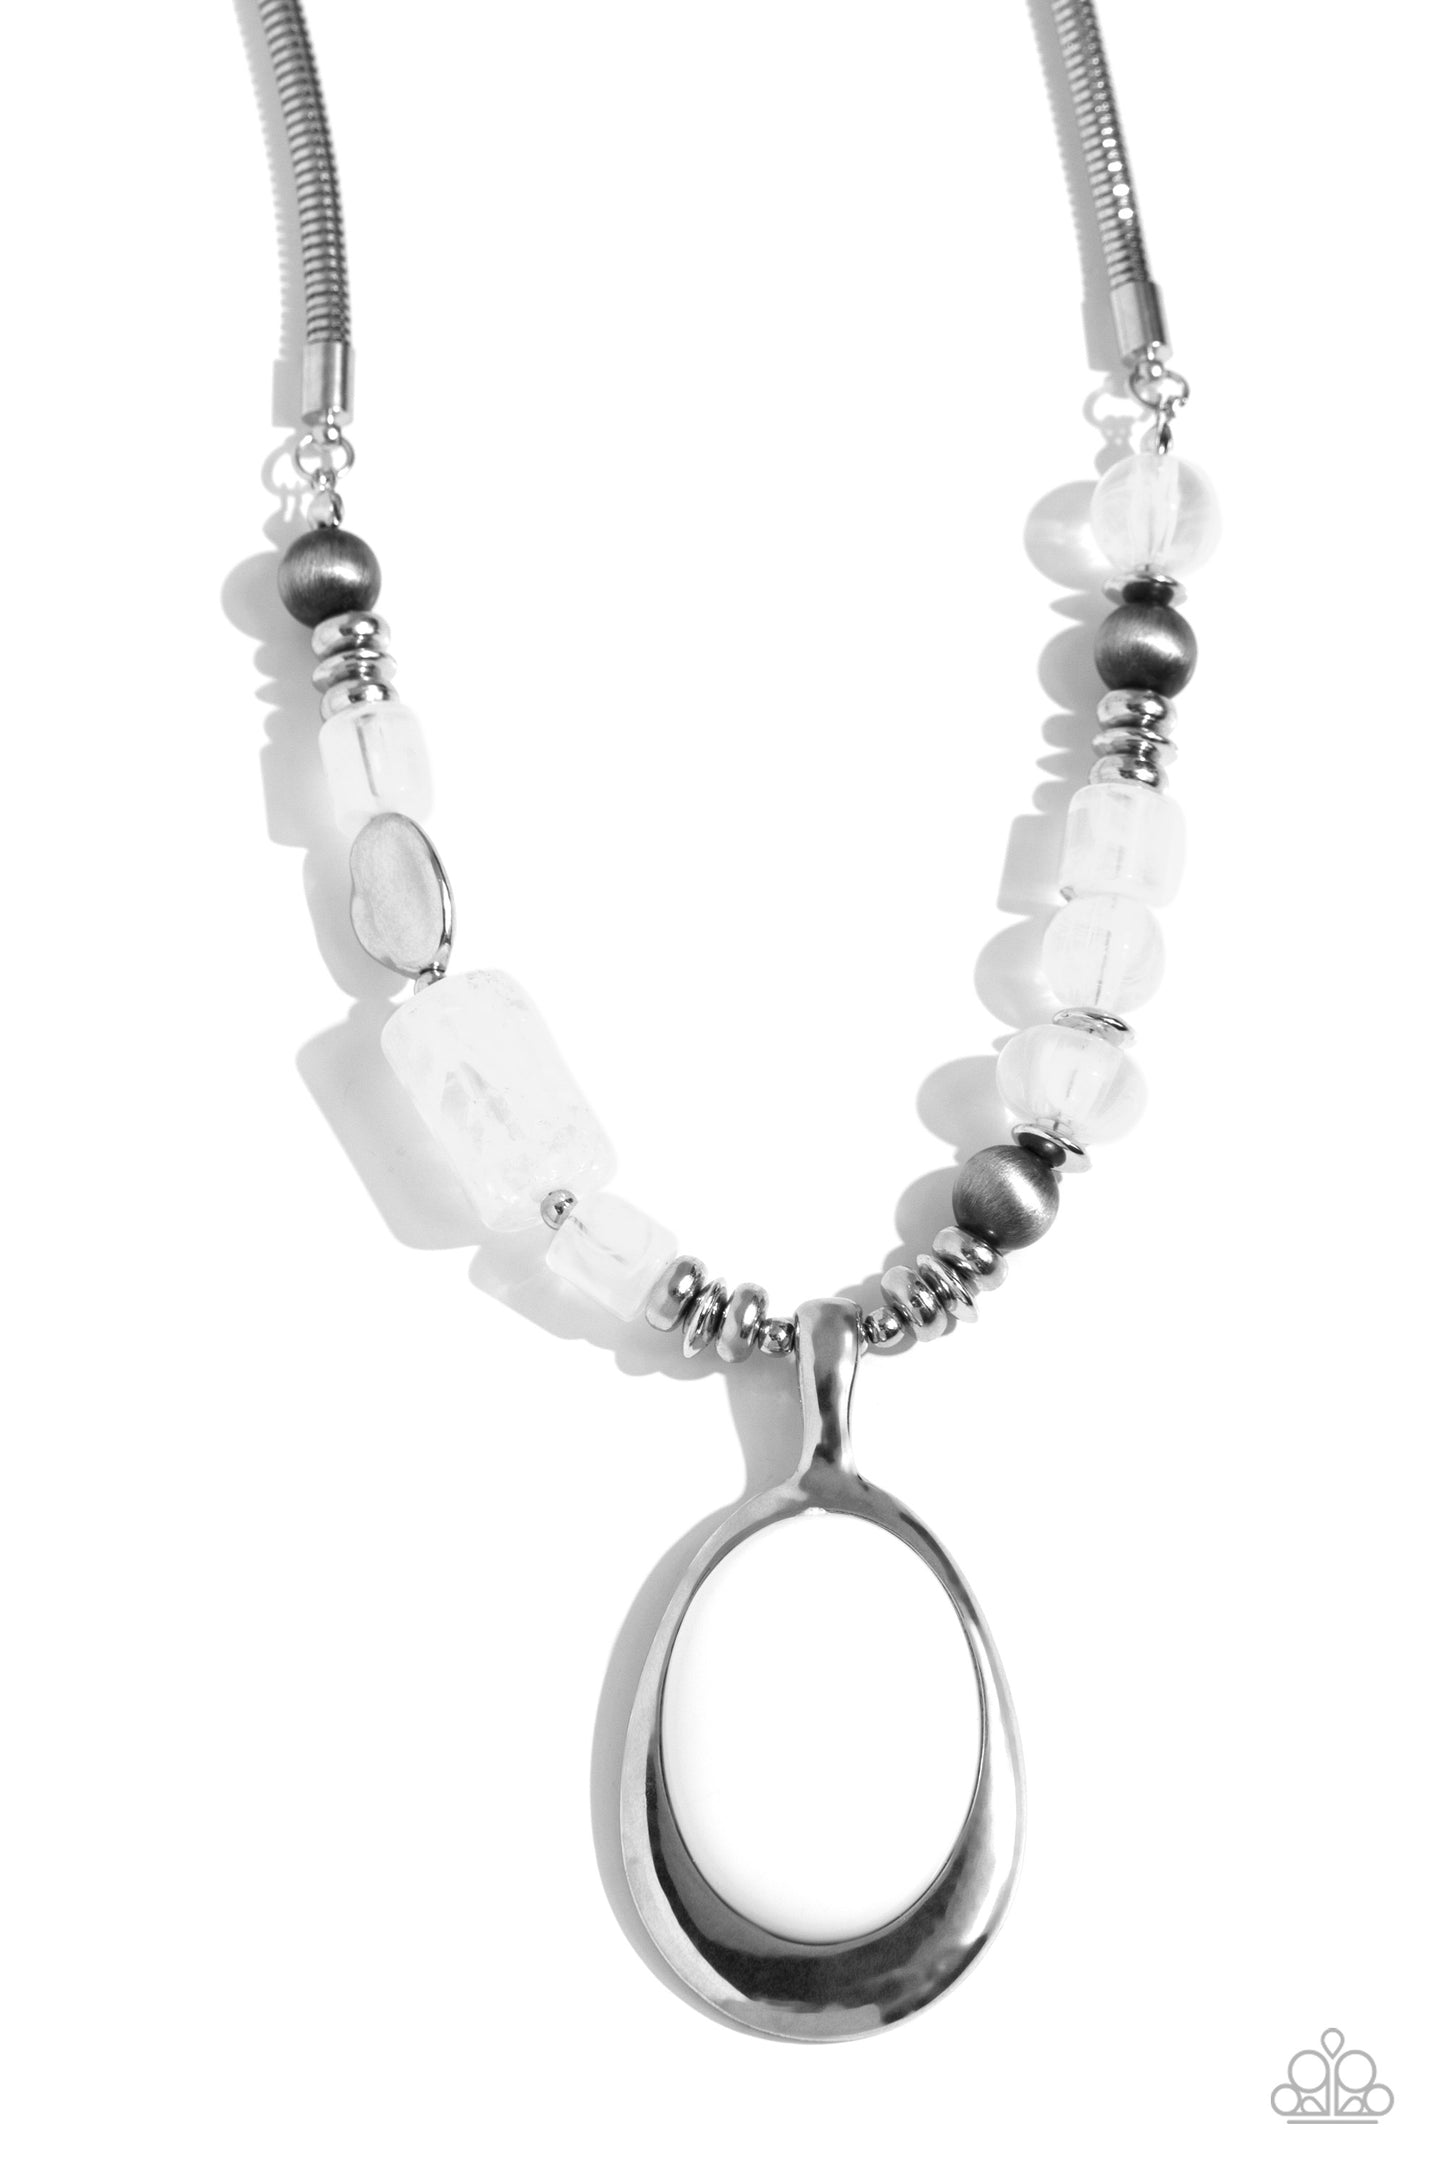 Paparazzi Accessories - Captivating Composition - White Necklaces giving way from a silver snake chain, a collection of glassy milky white beads, silver accents, and silver-patterned beads are threaded along an invisible wire below the collar for a flamboyant fashion. Pressed in a silver oval frame, an opaque white acrylic gleams below the capricious display for an additional pop of color. Features an adjustable clasp closure. Sold as one individual necklace. Includes one pair of matching earrings.